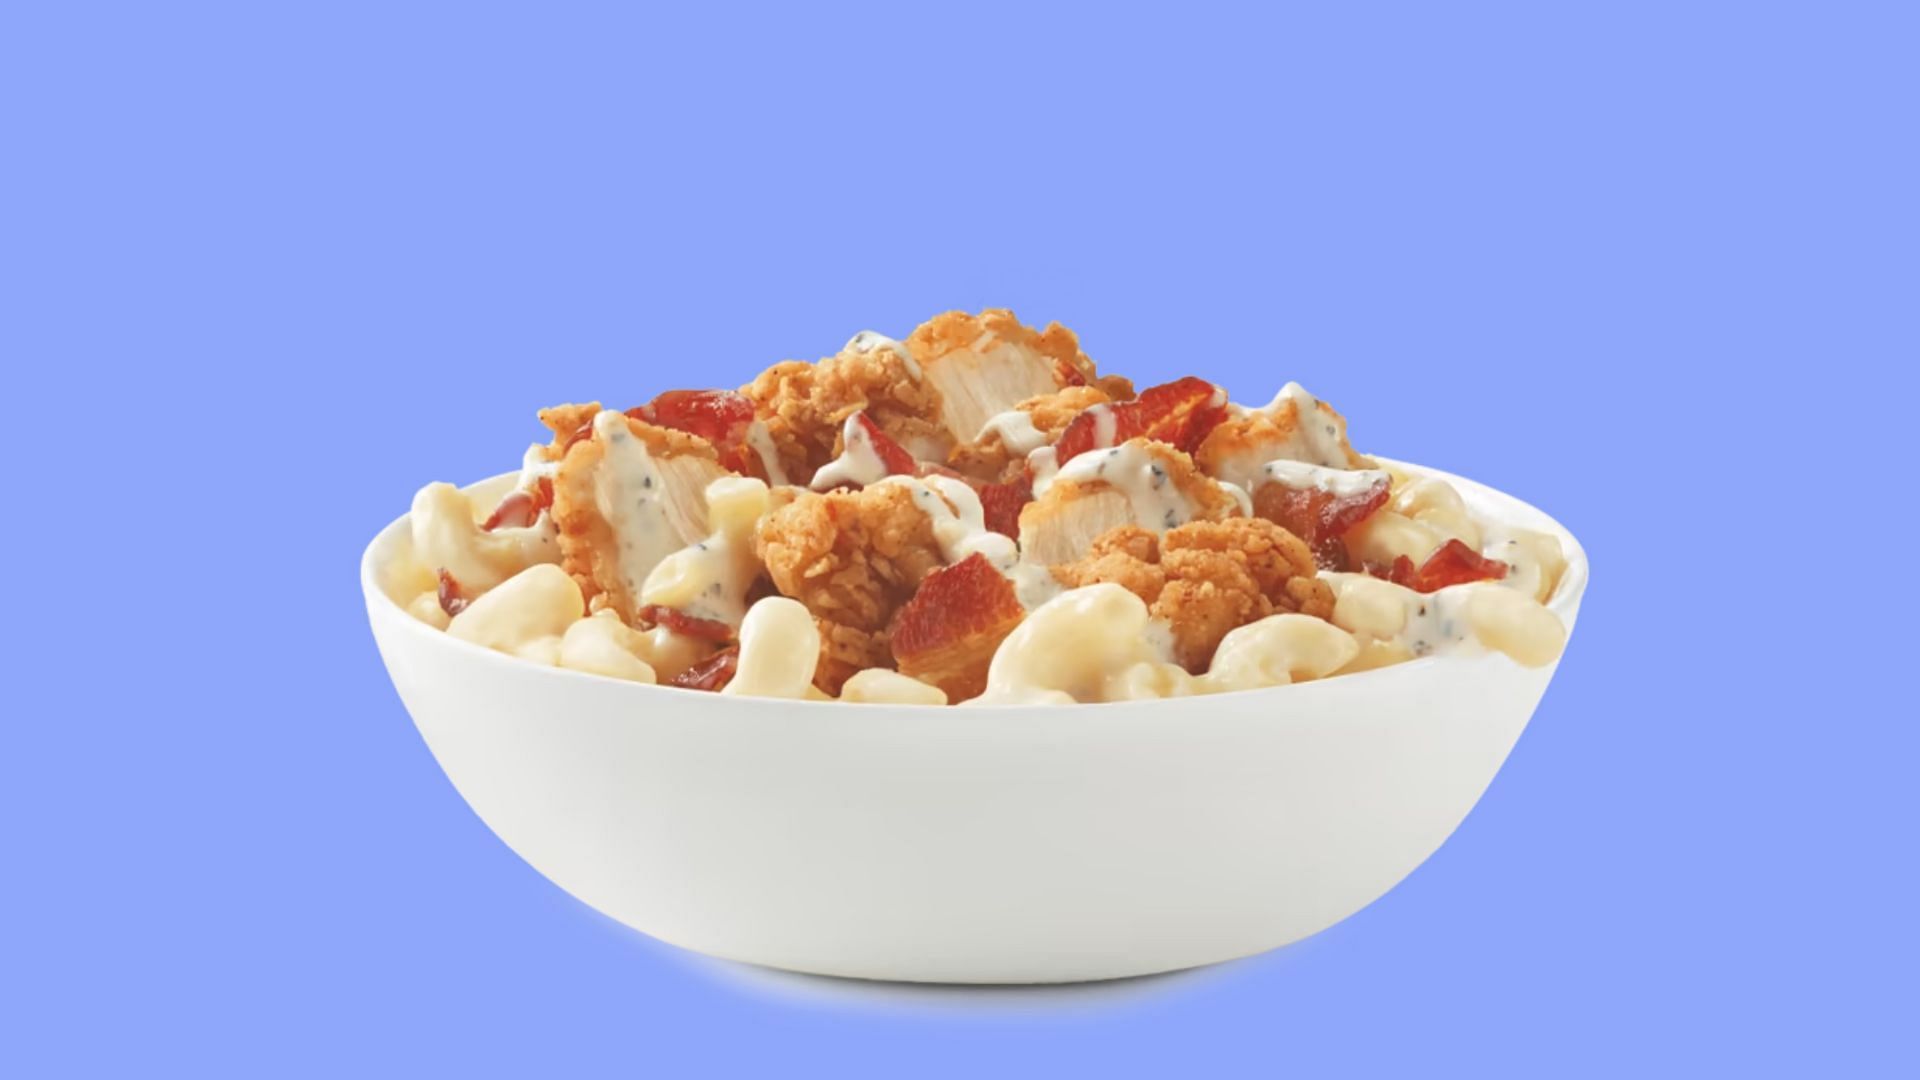 The all-new Loaded Chicken Bacon Ranch Mac &lsquo;N Cheese debuts on the chain&#039;s menu (Image via Arby&rsquo;s)